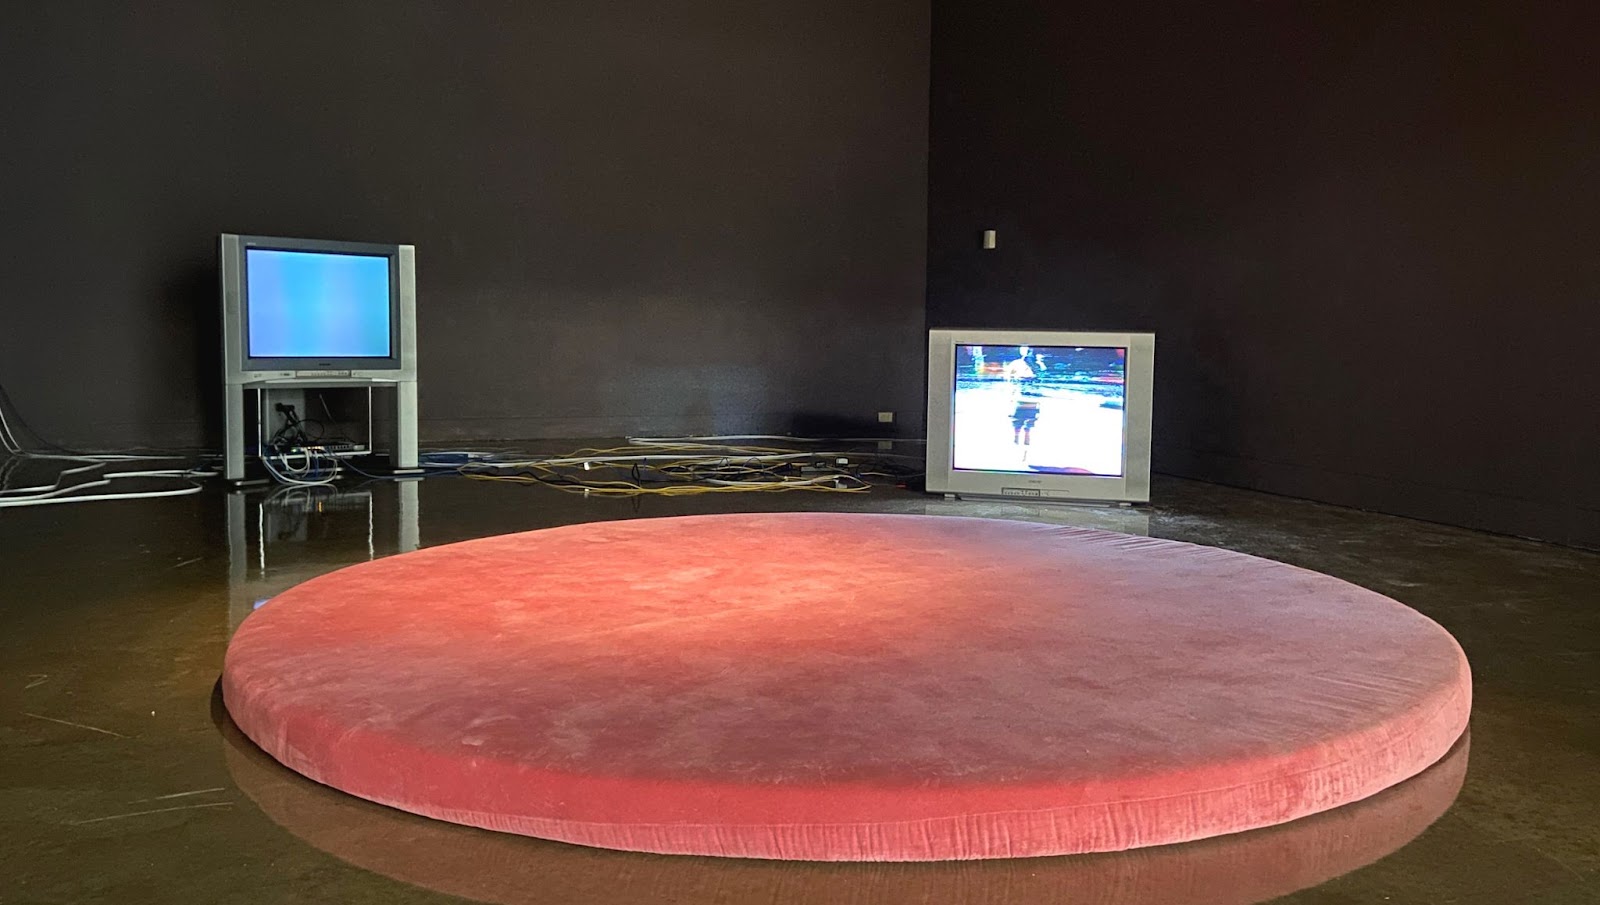 Image: Pipilotti Rist, (Enlastungen) Pipilottis Fehler (still), 1988, single channel video. Installation at the Tarble Arts Center, 2021. A large, circular, pink, upholstered platform sits on a concrete floor. Behind the platform are two 1990s-era televisions: on the right, the television sits on the floor. On the screen is a disrupted image of a person. On the left, a television is raised on a platform. The screen is blue. Several wires are on the floor behind the televisions. Photo by Jessica Hammie.